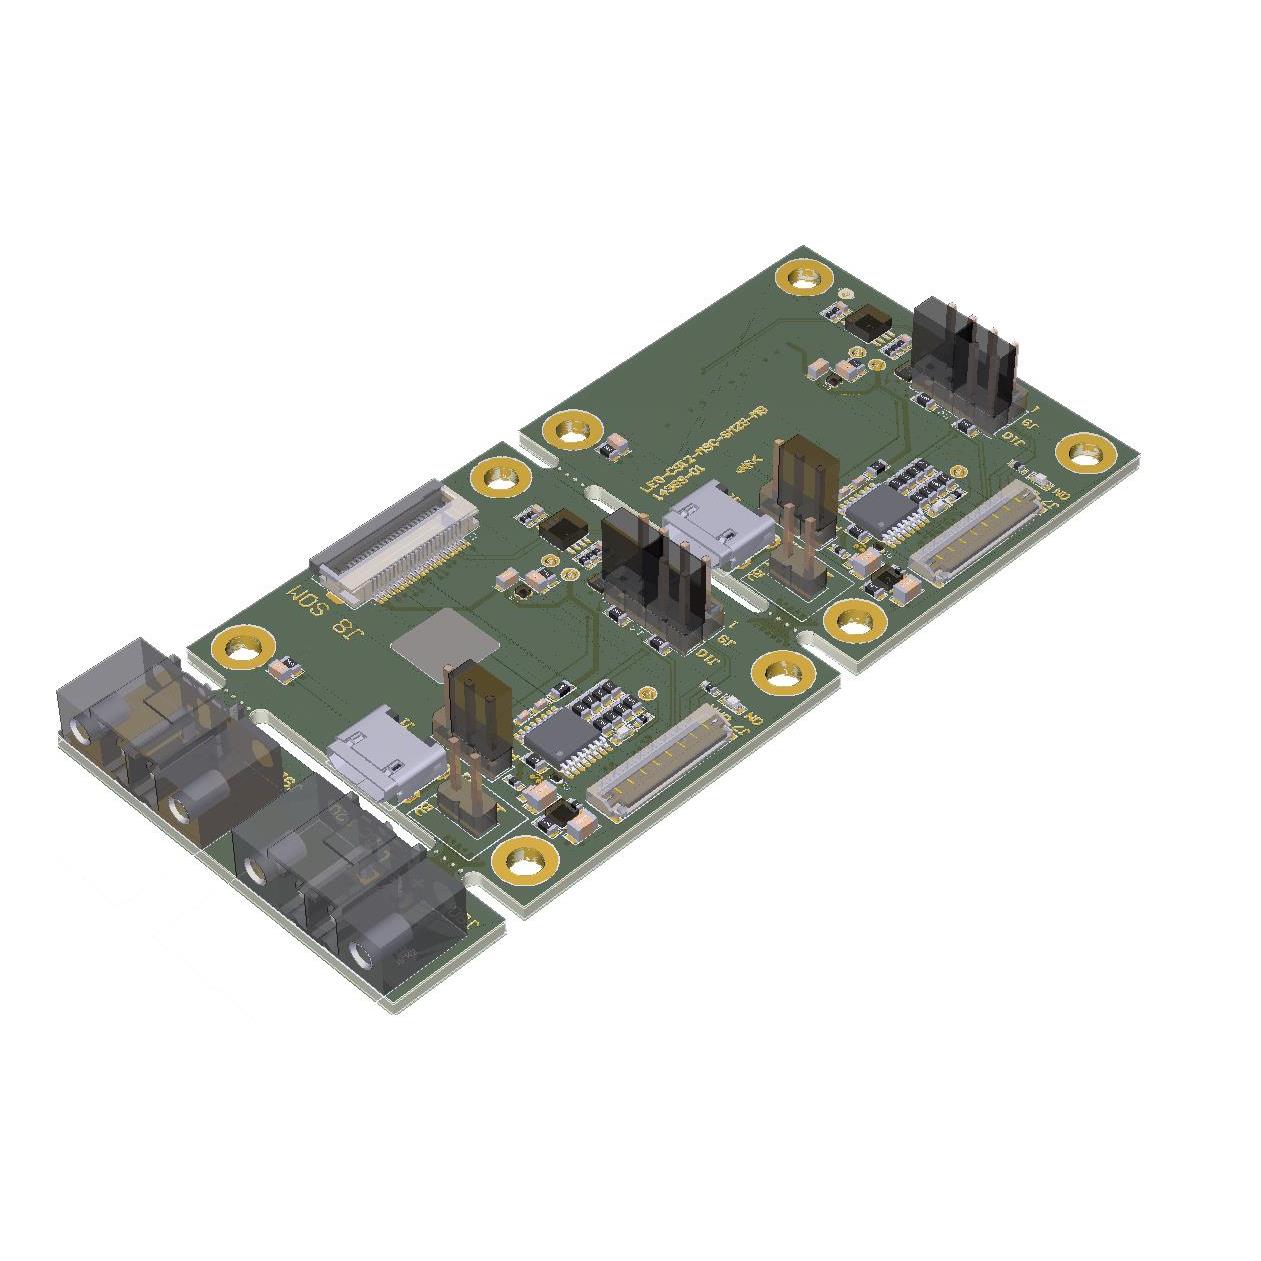 【ADAPTER BOARD AVNET MSC SM2S-MB-EPS】ADAPTER BOARD FOR MSC SM2S-MB-EP